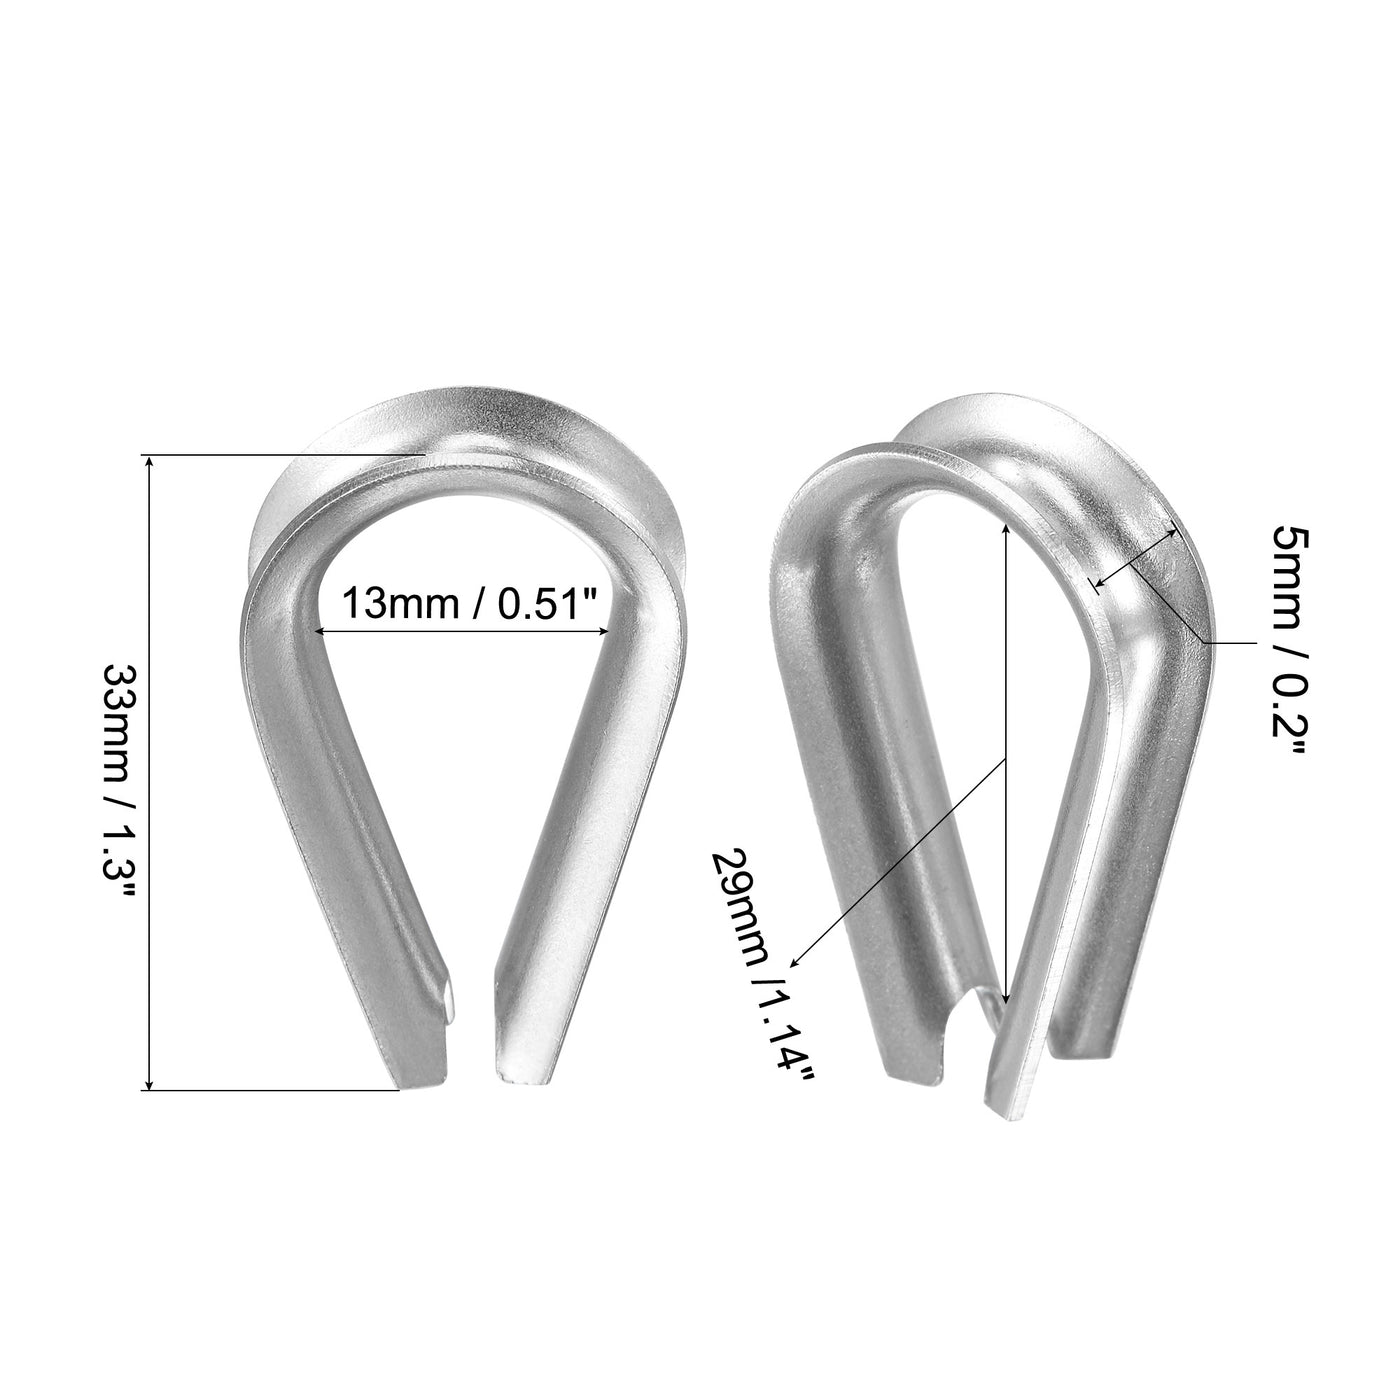 uxcell Uxcell Wire Rope Cable Clip Kit for M5, Included Rope Clamp 10Pcs and Thimble Rigging 10Pcs, 304 Stainless Steel U Bolt Saddle Fastener